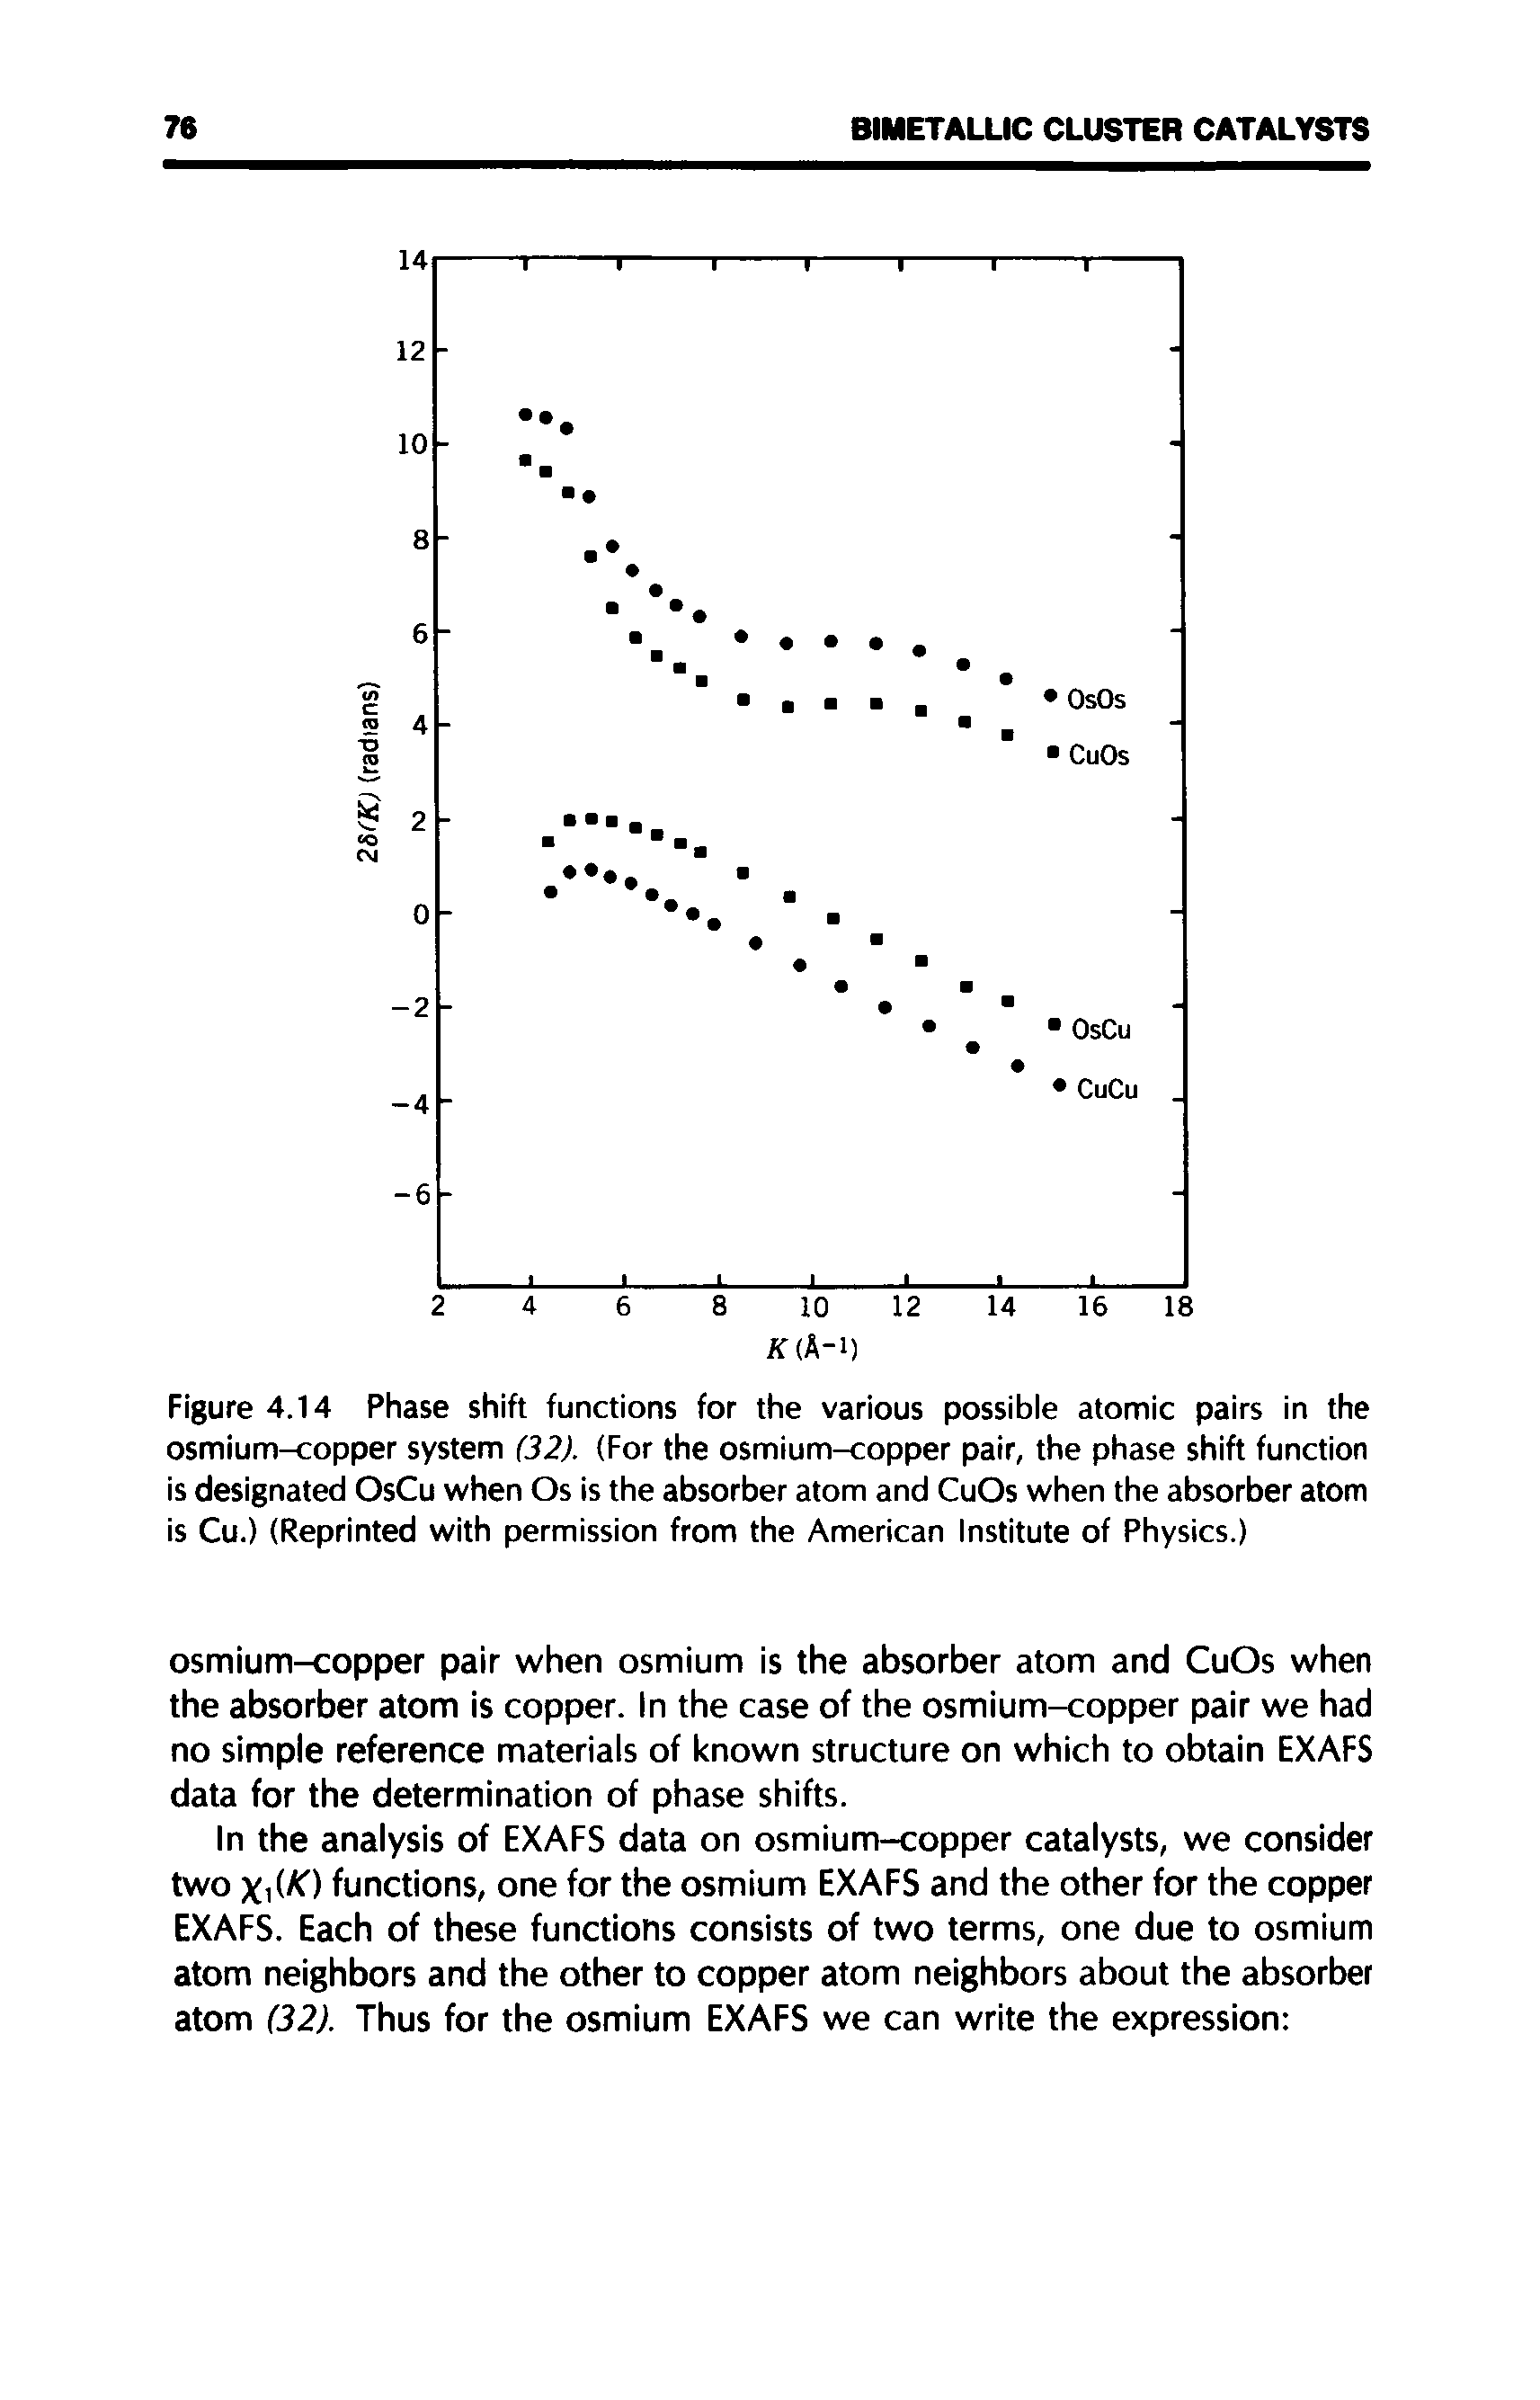 Figure 4.14 Phase shift functions for the various possible atomic pairs in the osmium-copper system (32). (For the osmium-copper pair, the phase shift function is designated OsCu when Os is the absorber atom and CuOs when the absorber atom is Cu.) (Reprinted with permission from the American Institute of Physics.)...